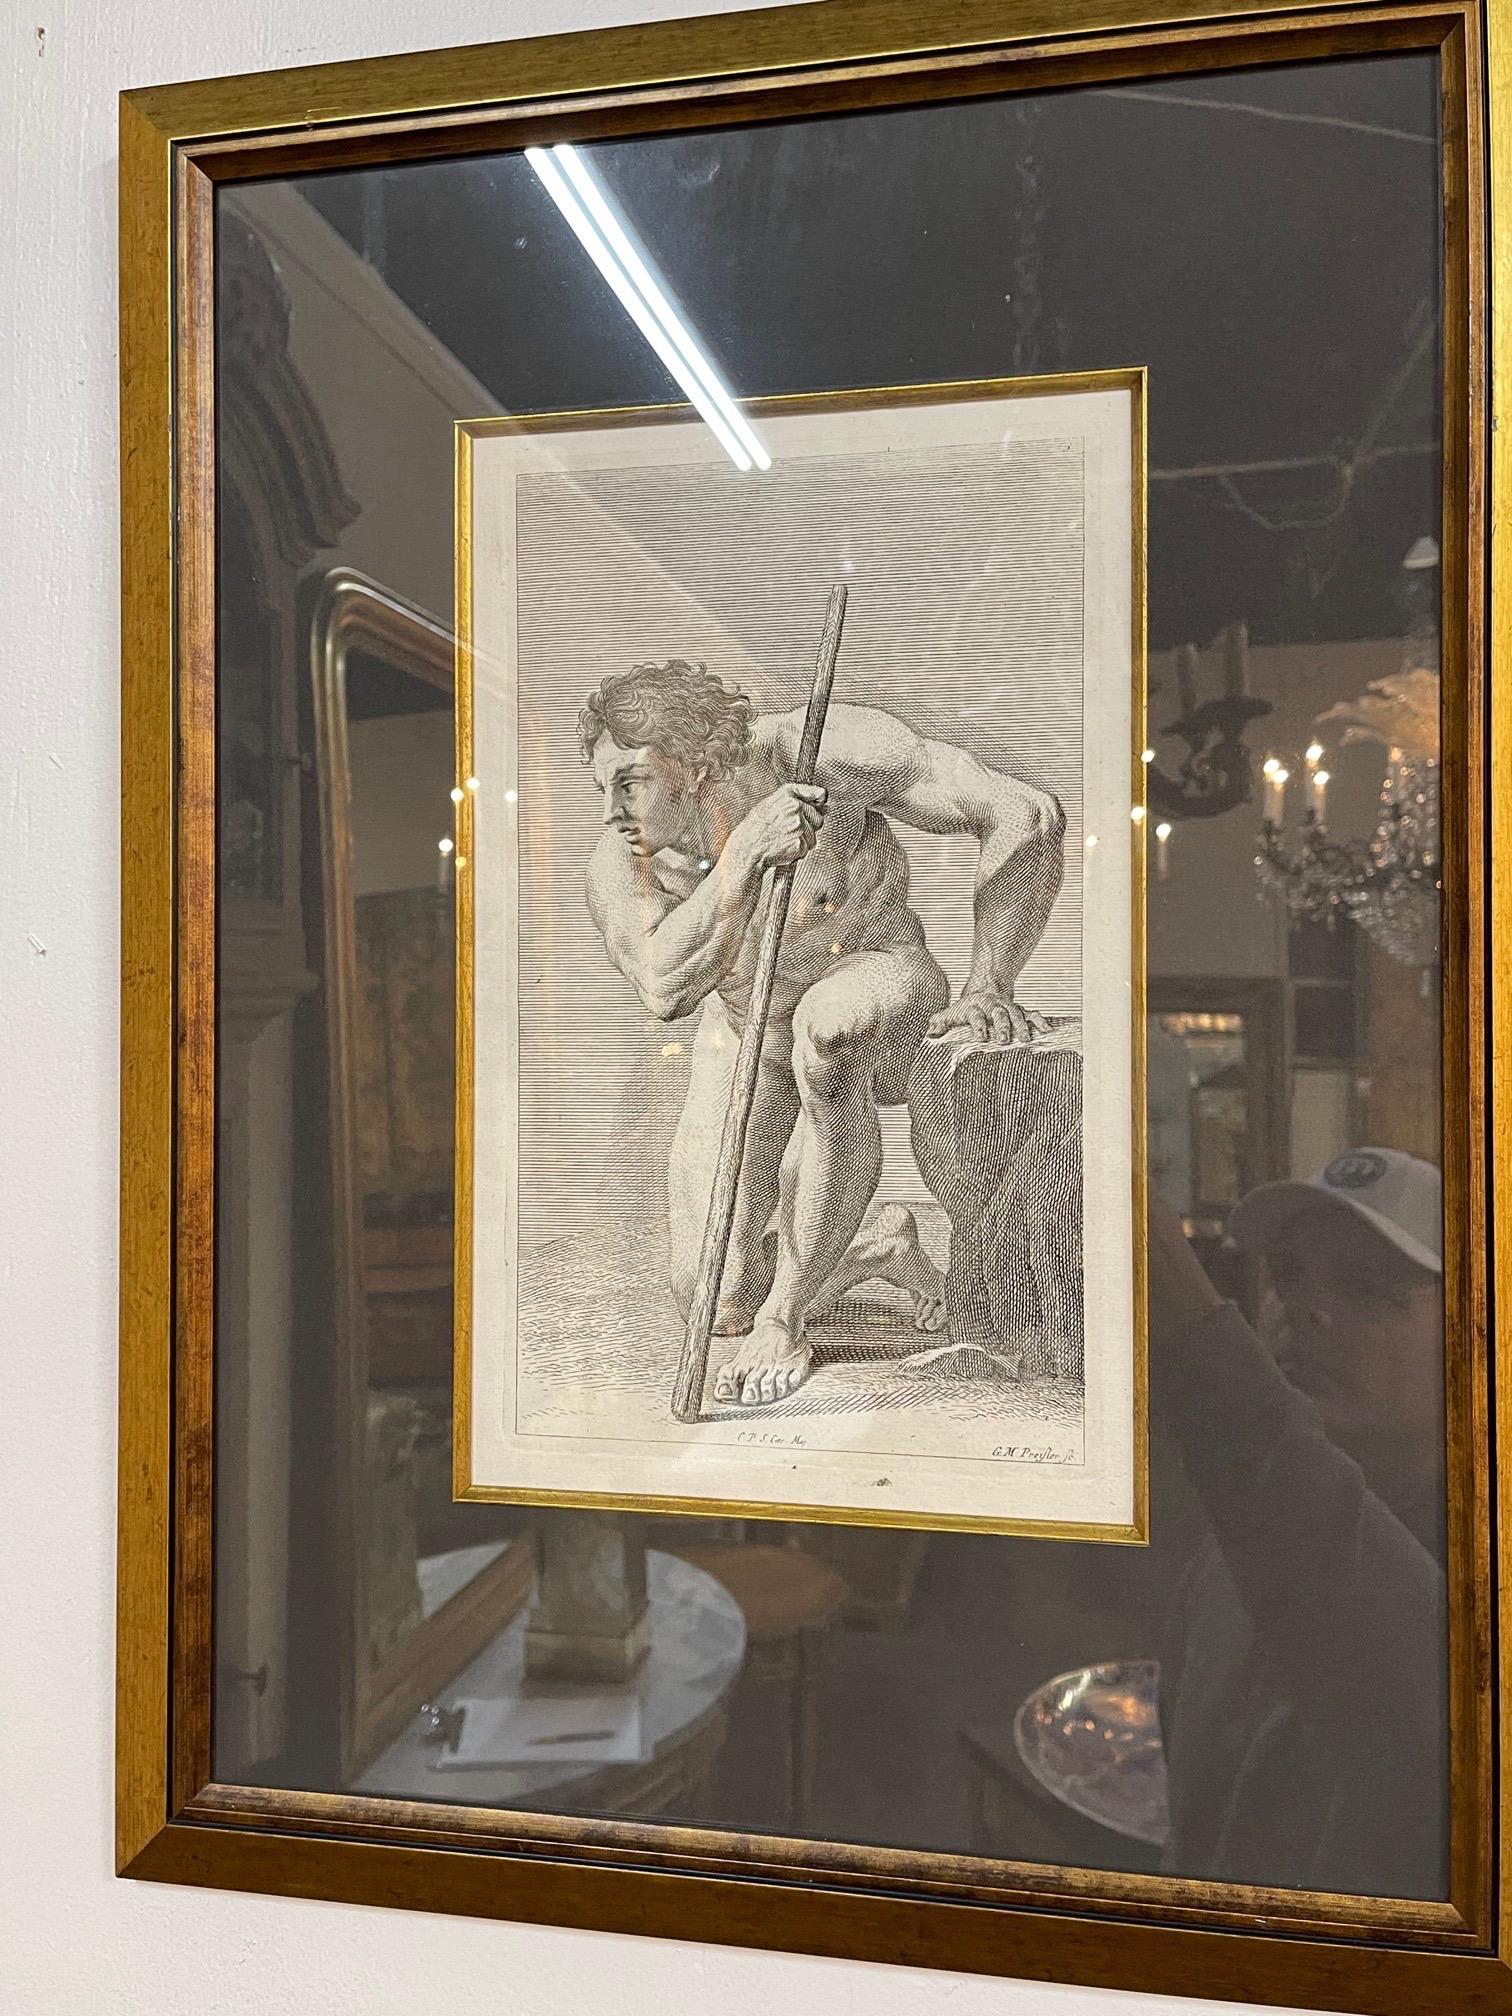 Gorgeous set of 4 Italian vintage black and white copper engravings featuring a muscular male form. Beautifully framed and matted. Makes a great accessory!